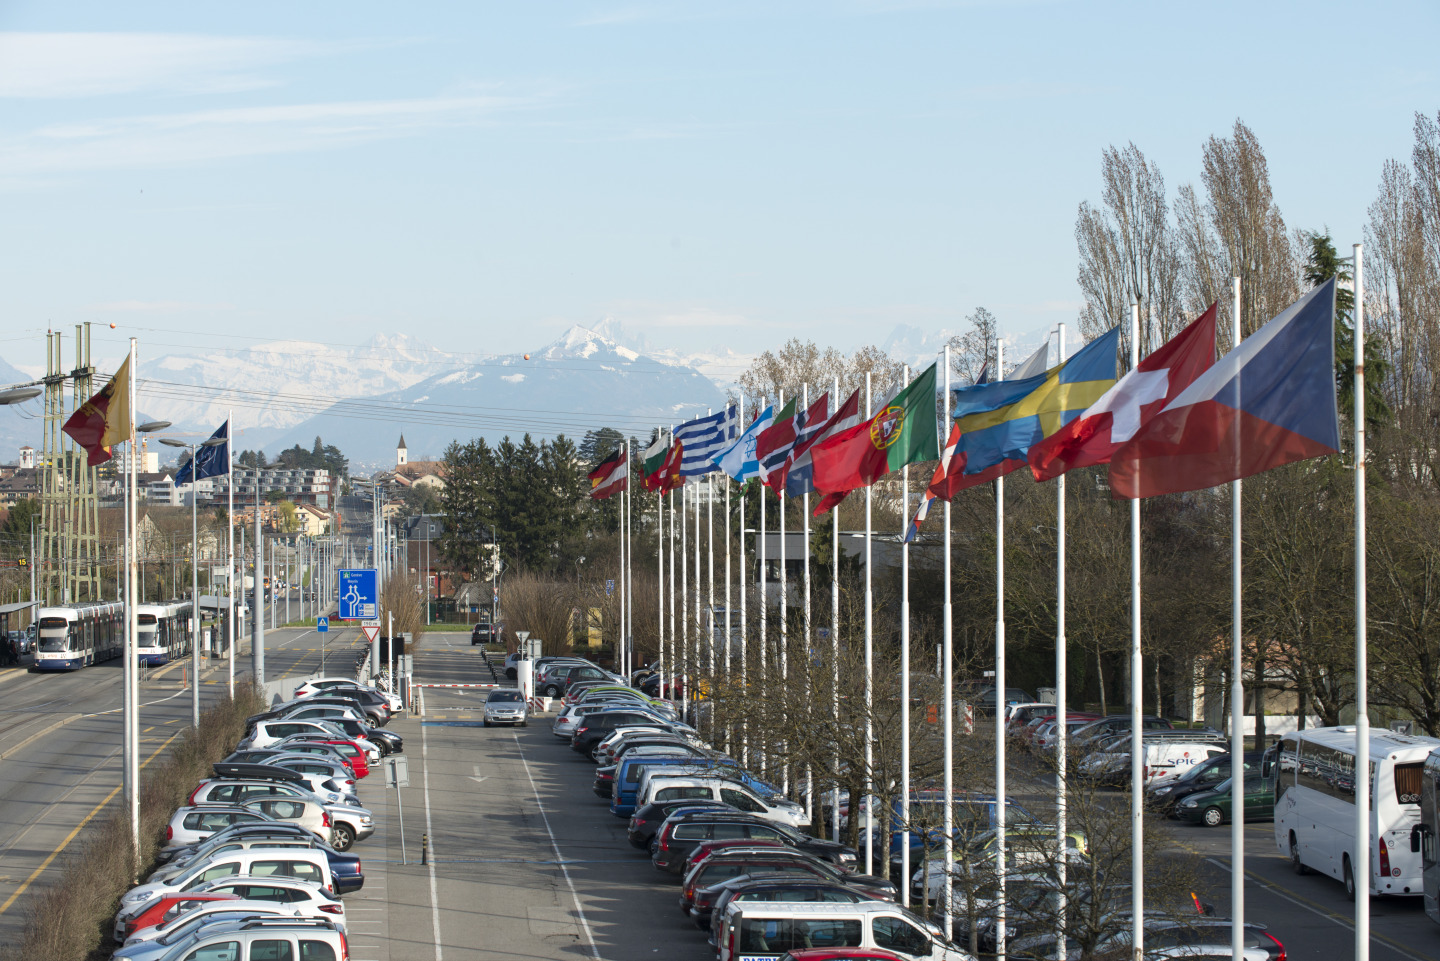 The flags of the CERN Member states